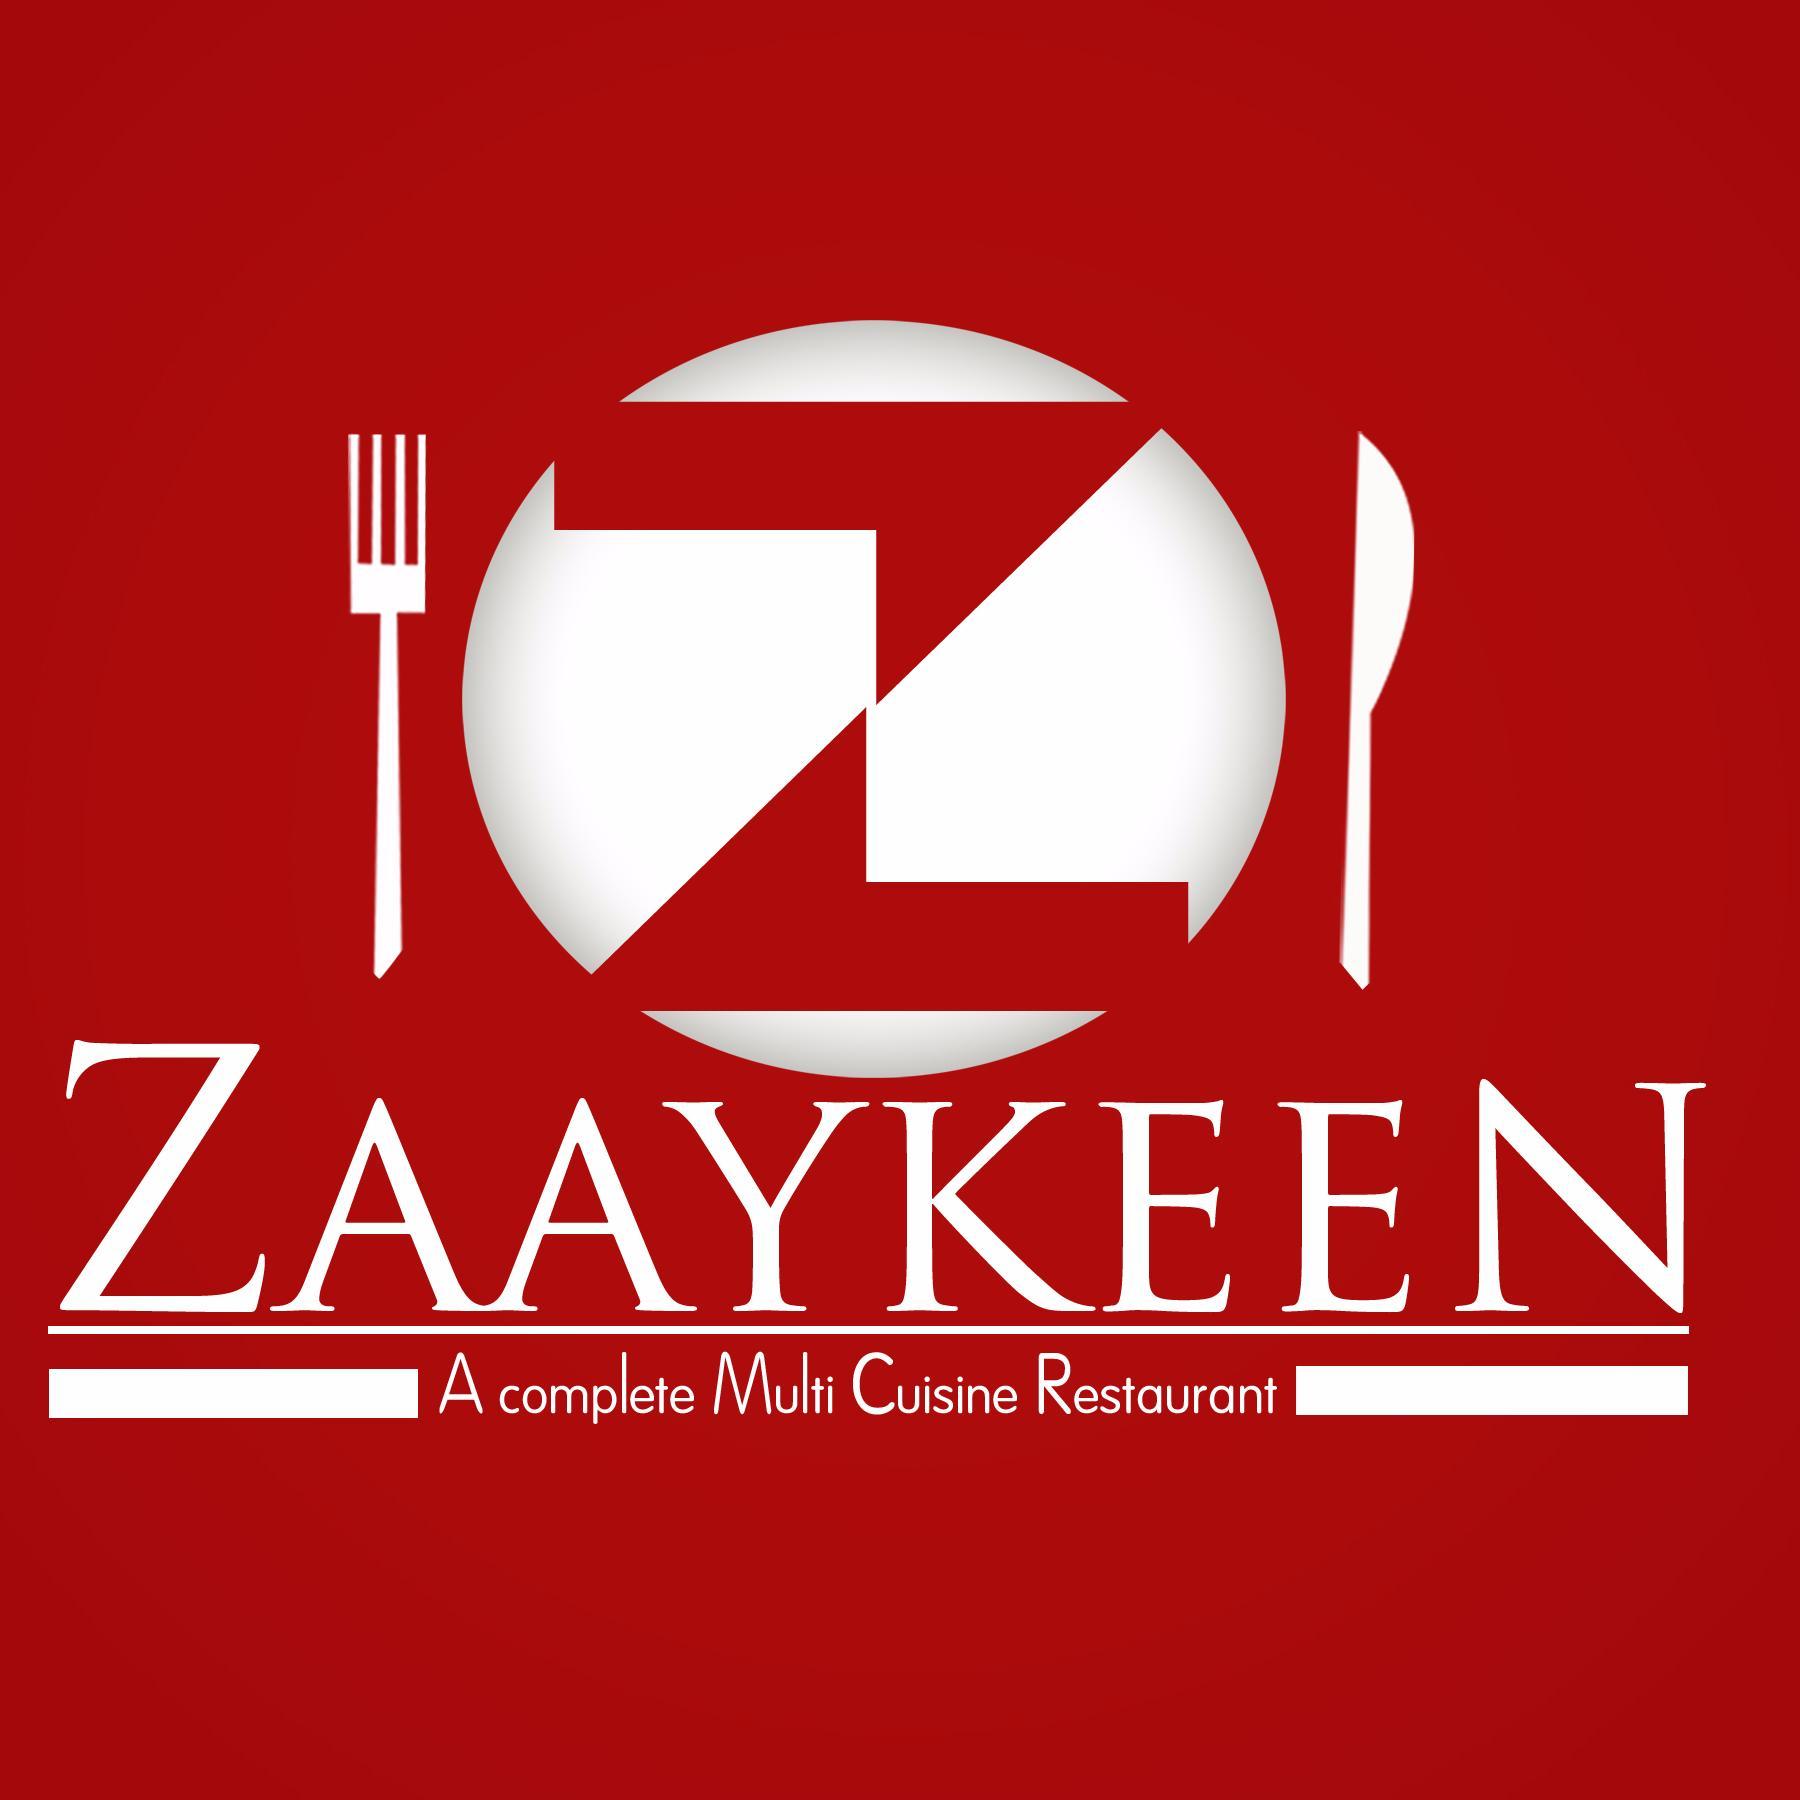 Zaaykeen is a multi-cuisine family restaurant specialized in bringing popular dishes of different places under one roof.